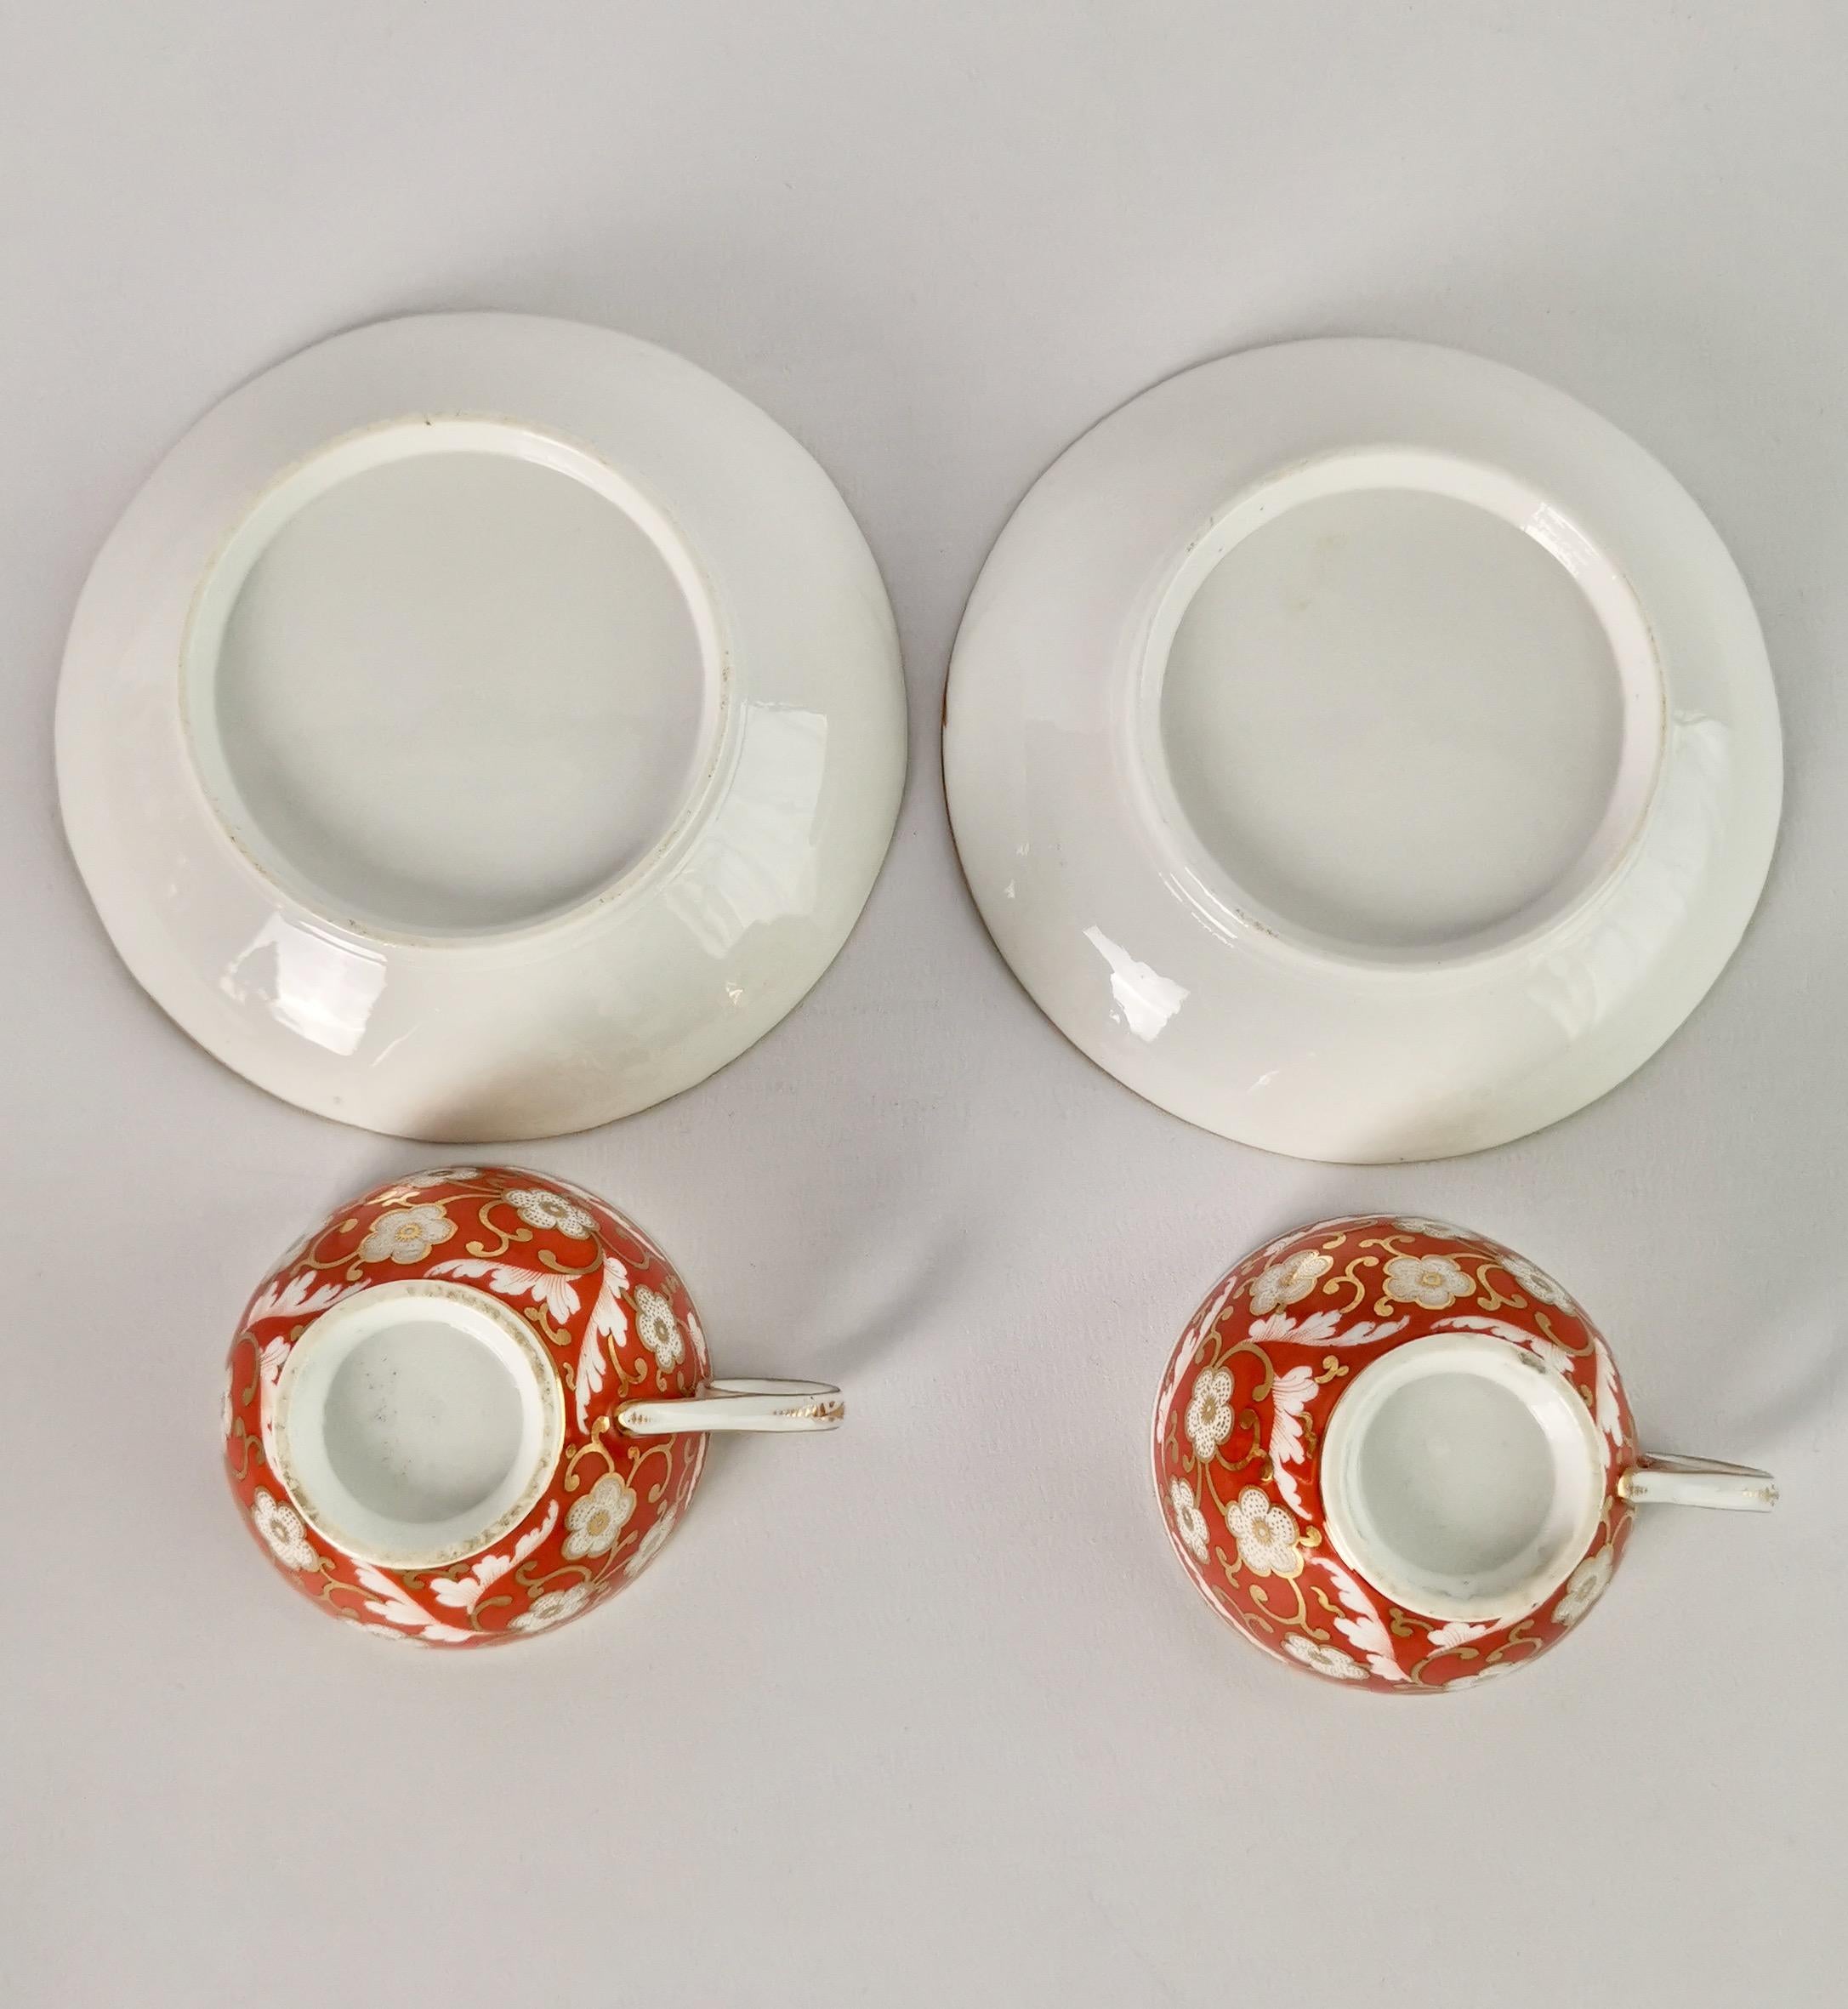 Chamberlains Worcester Tiny Tea Service for Two, Orange Floral, Regency ca 1805 5